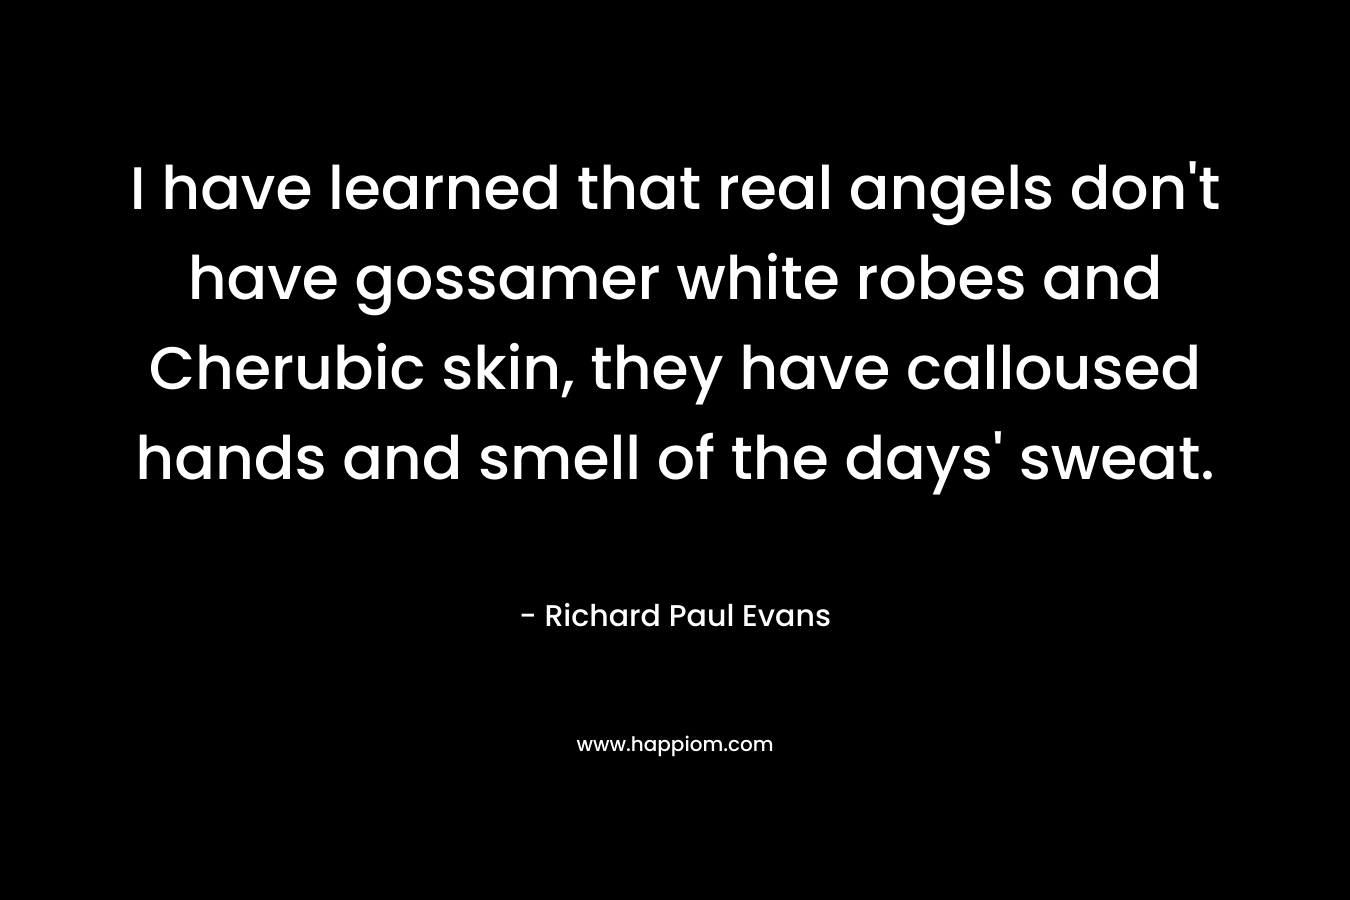 I have learned that real angels don’t have gossamer white robes and Cherubic skin, they have calloused hands and smell of the days’ sweat. – Richard Paul Evans